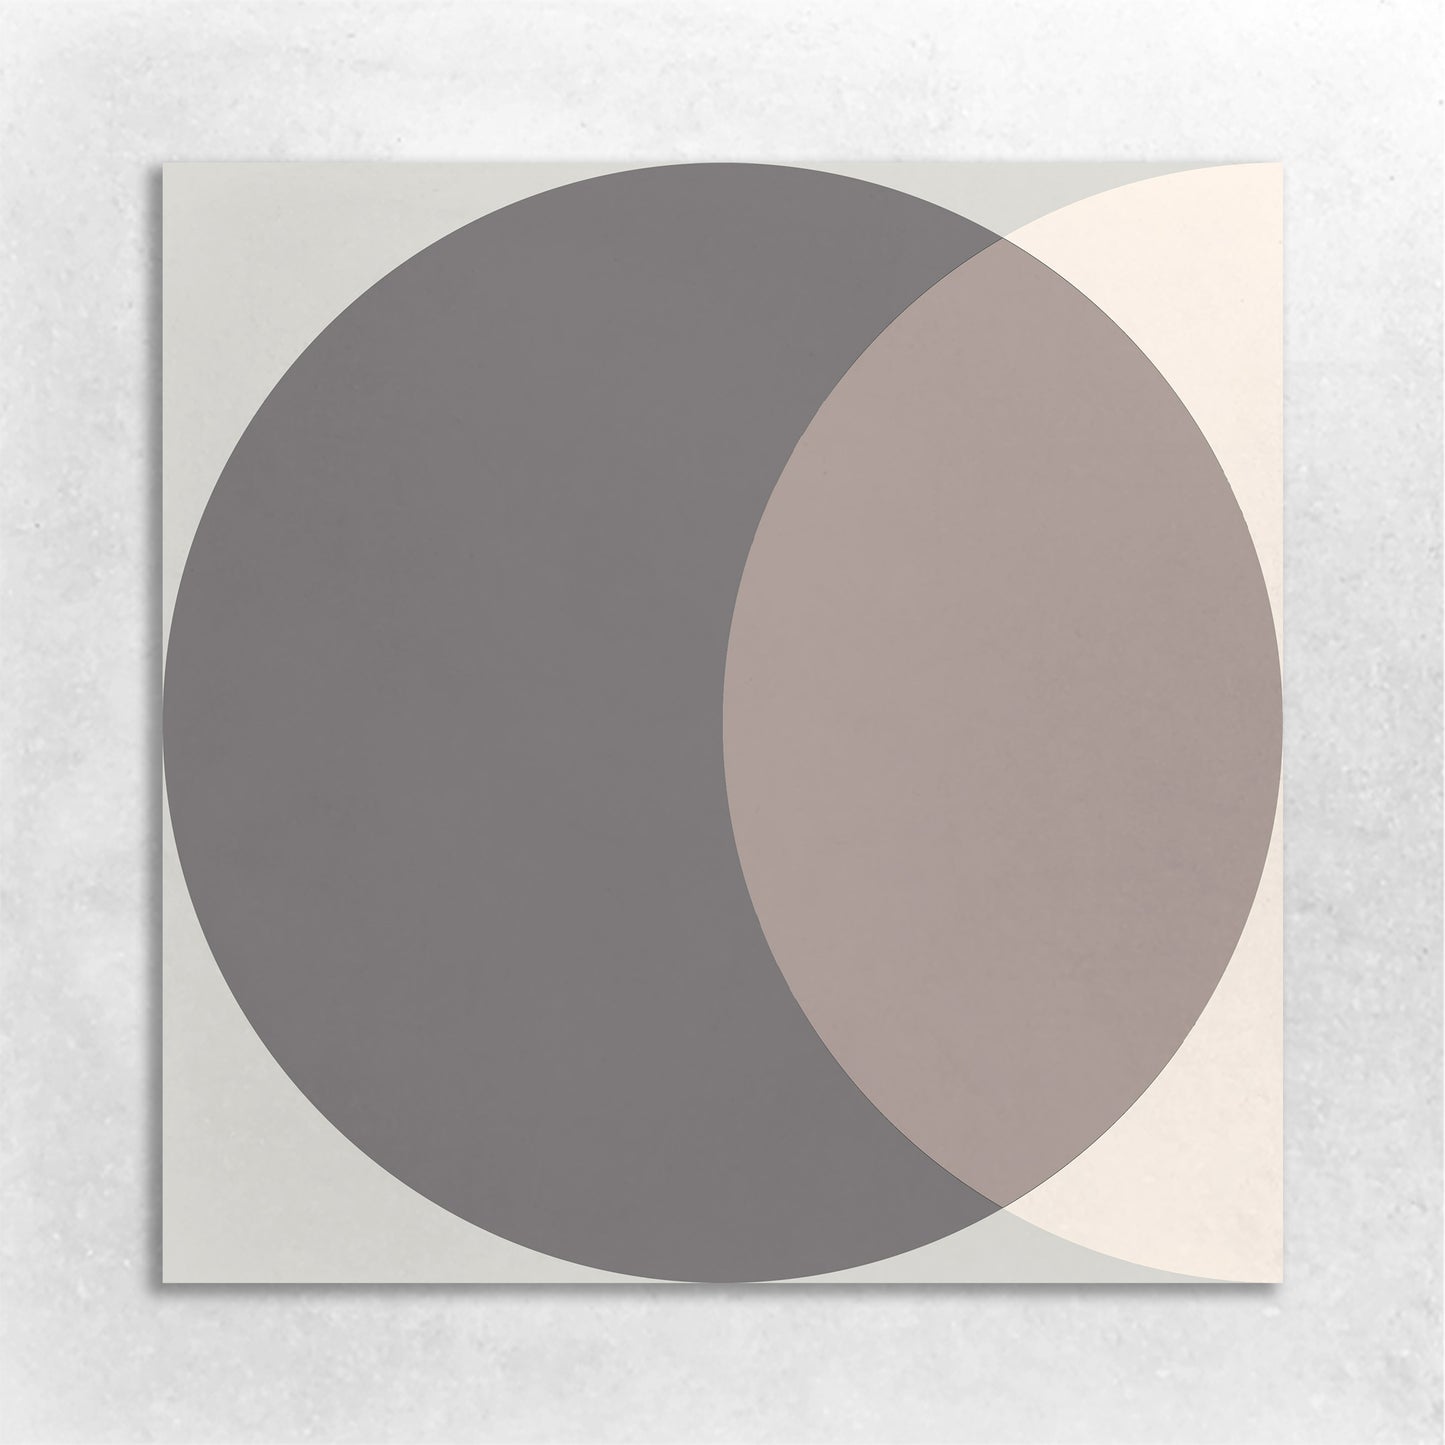 a 8x8 cement tile with a circle graphic in colors of beige, grey, and brown